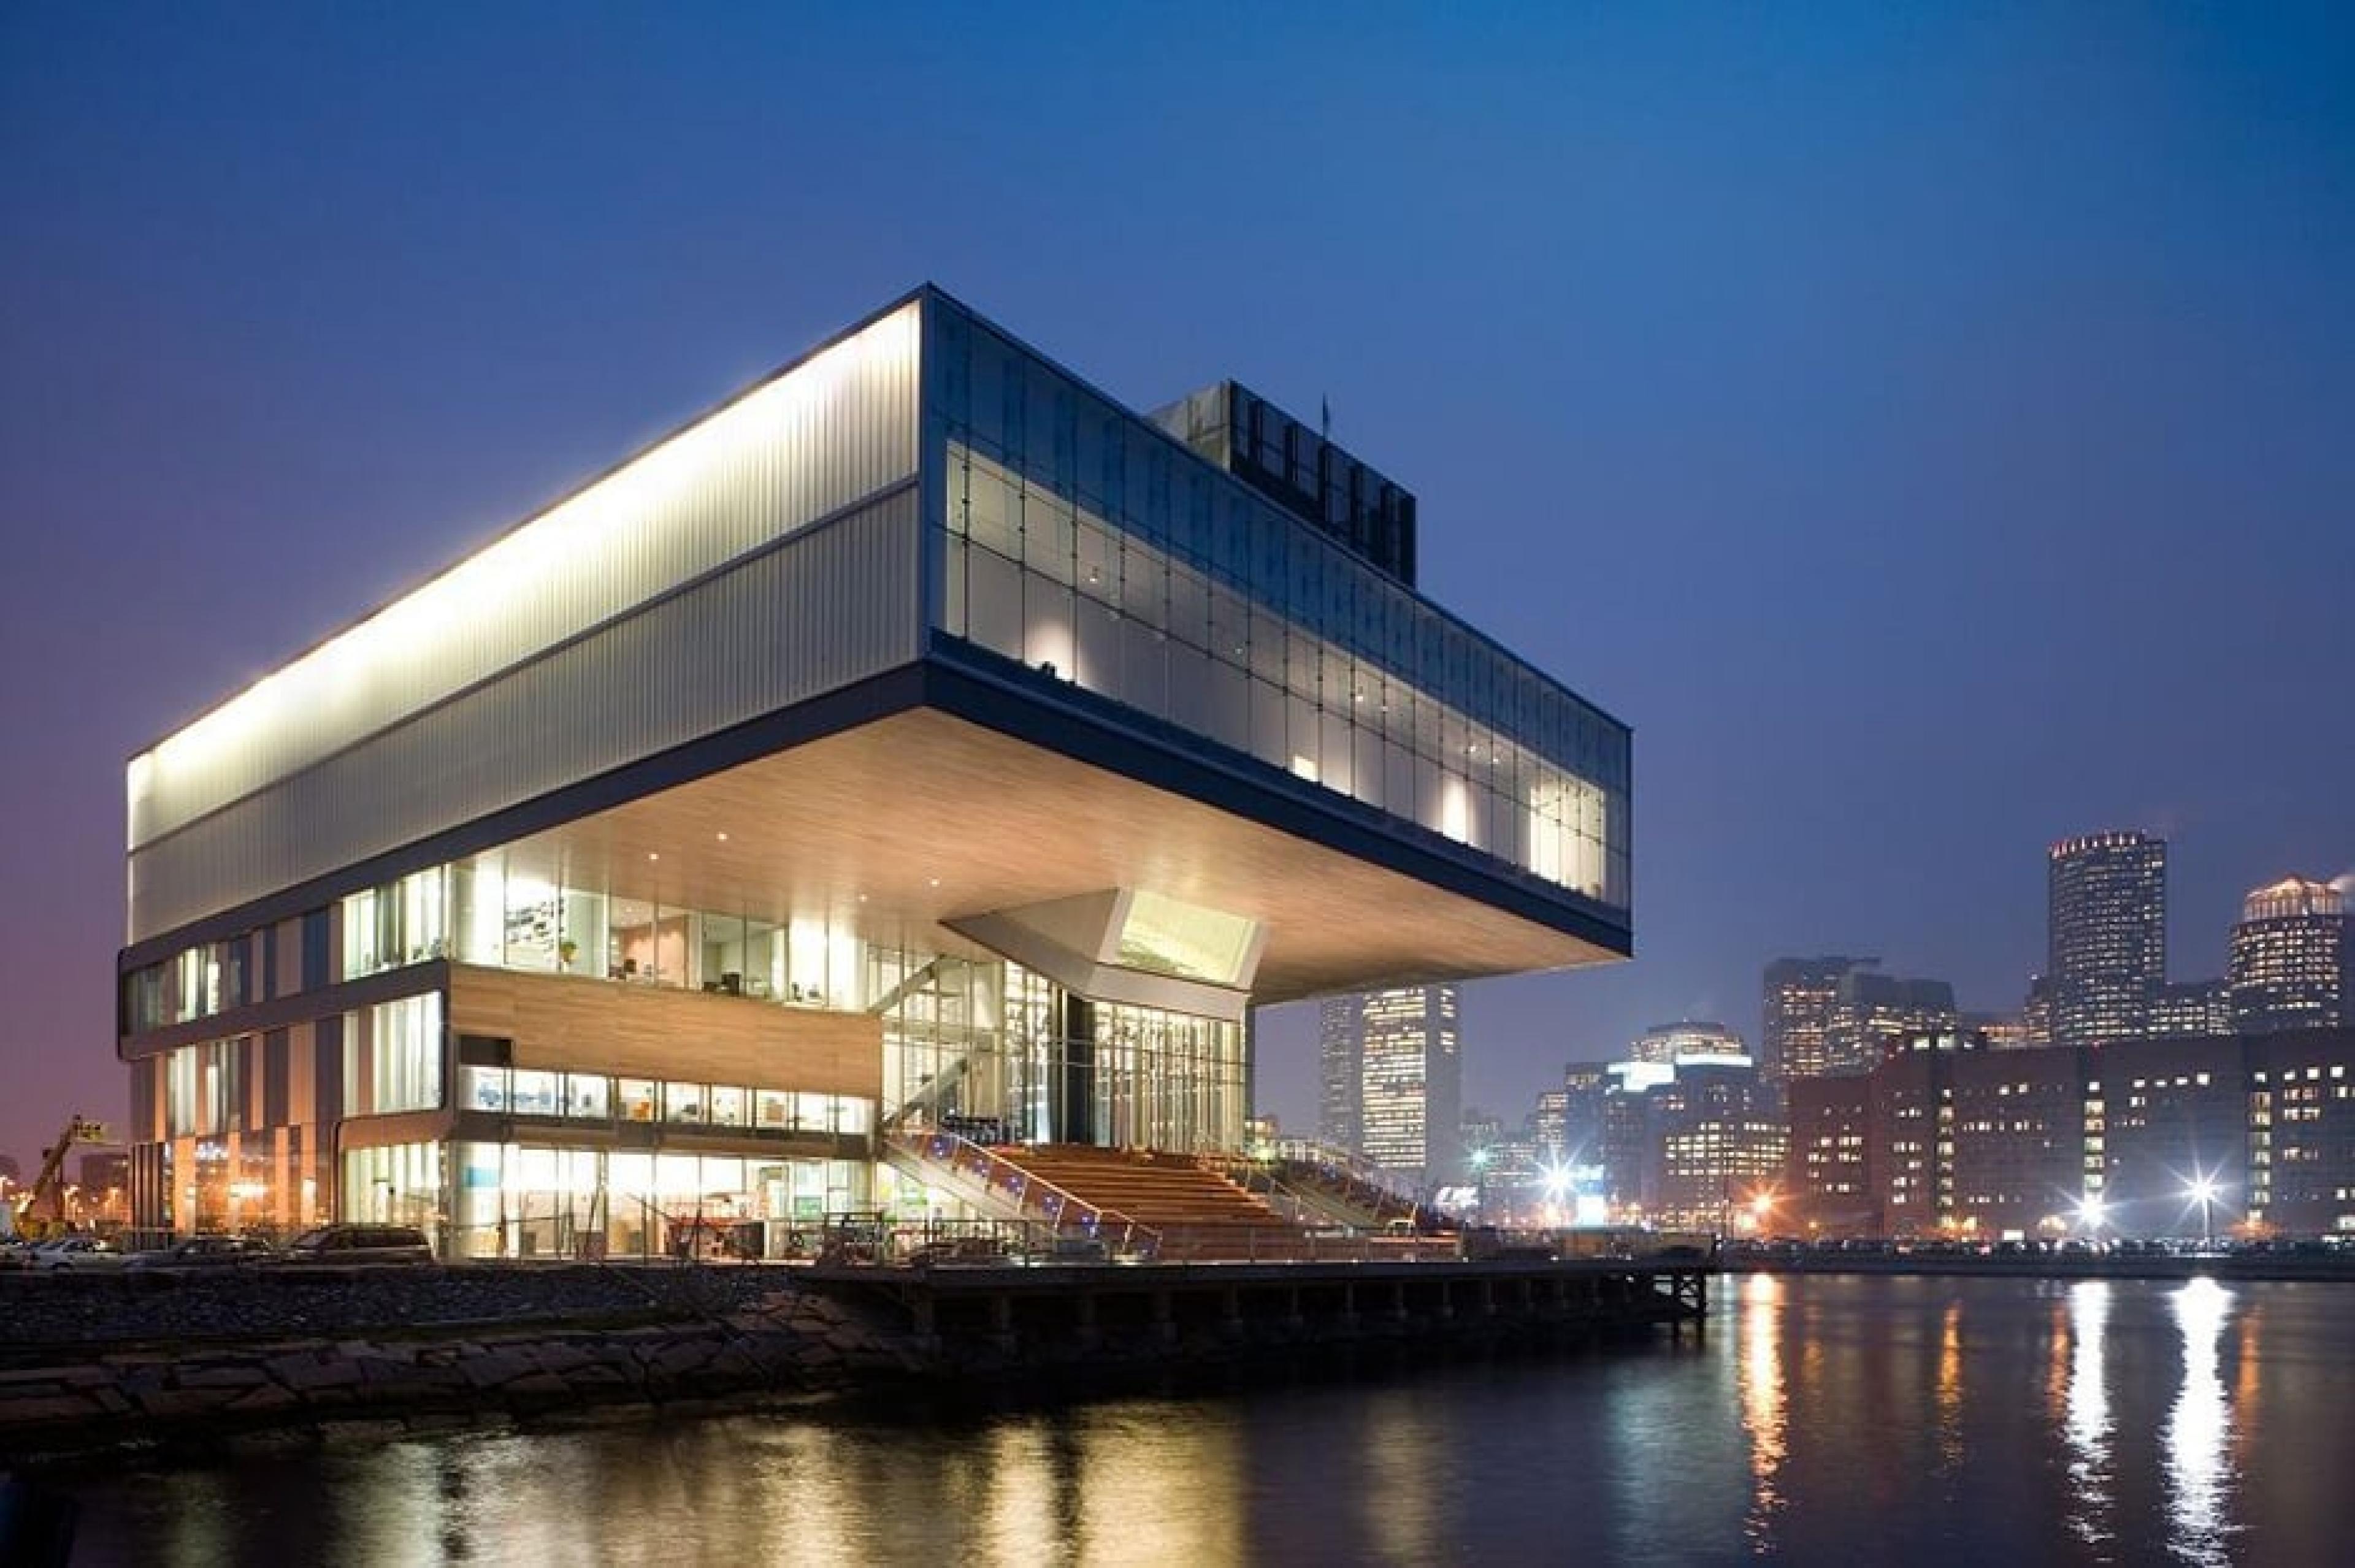 Exterior View - Institute of Contemporary Art, Boston, New England - photography by Iwan Baan